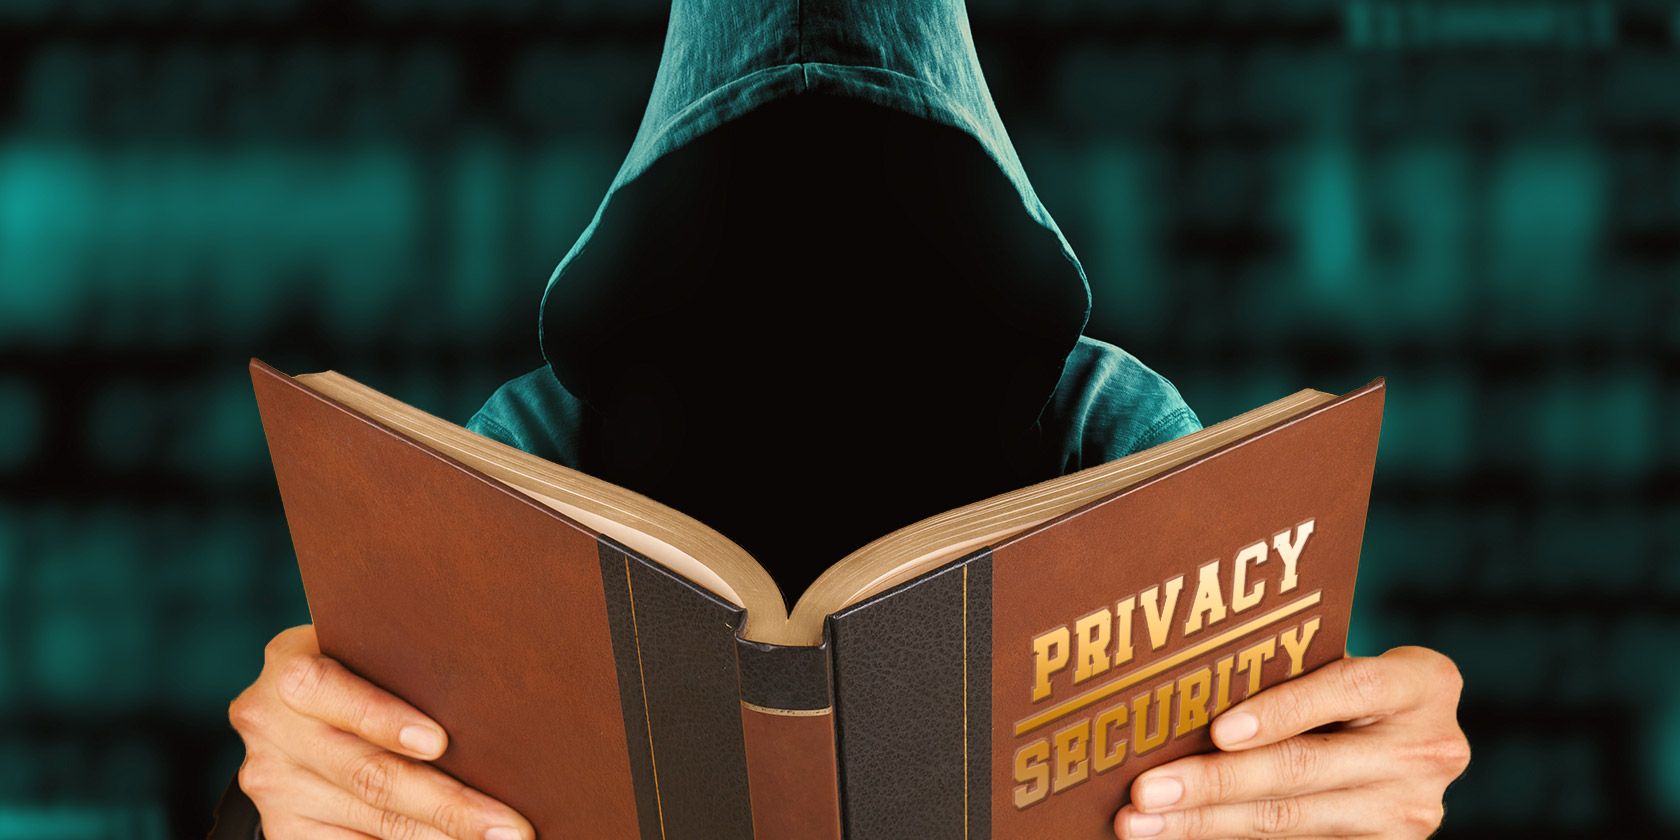 privacy-security-books